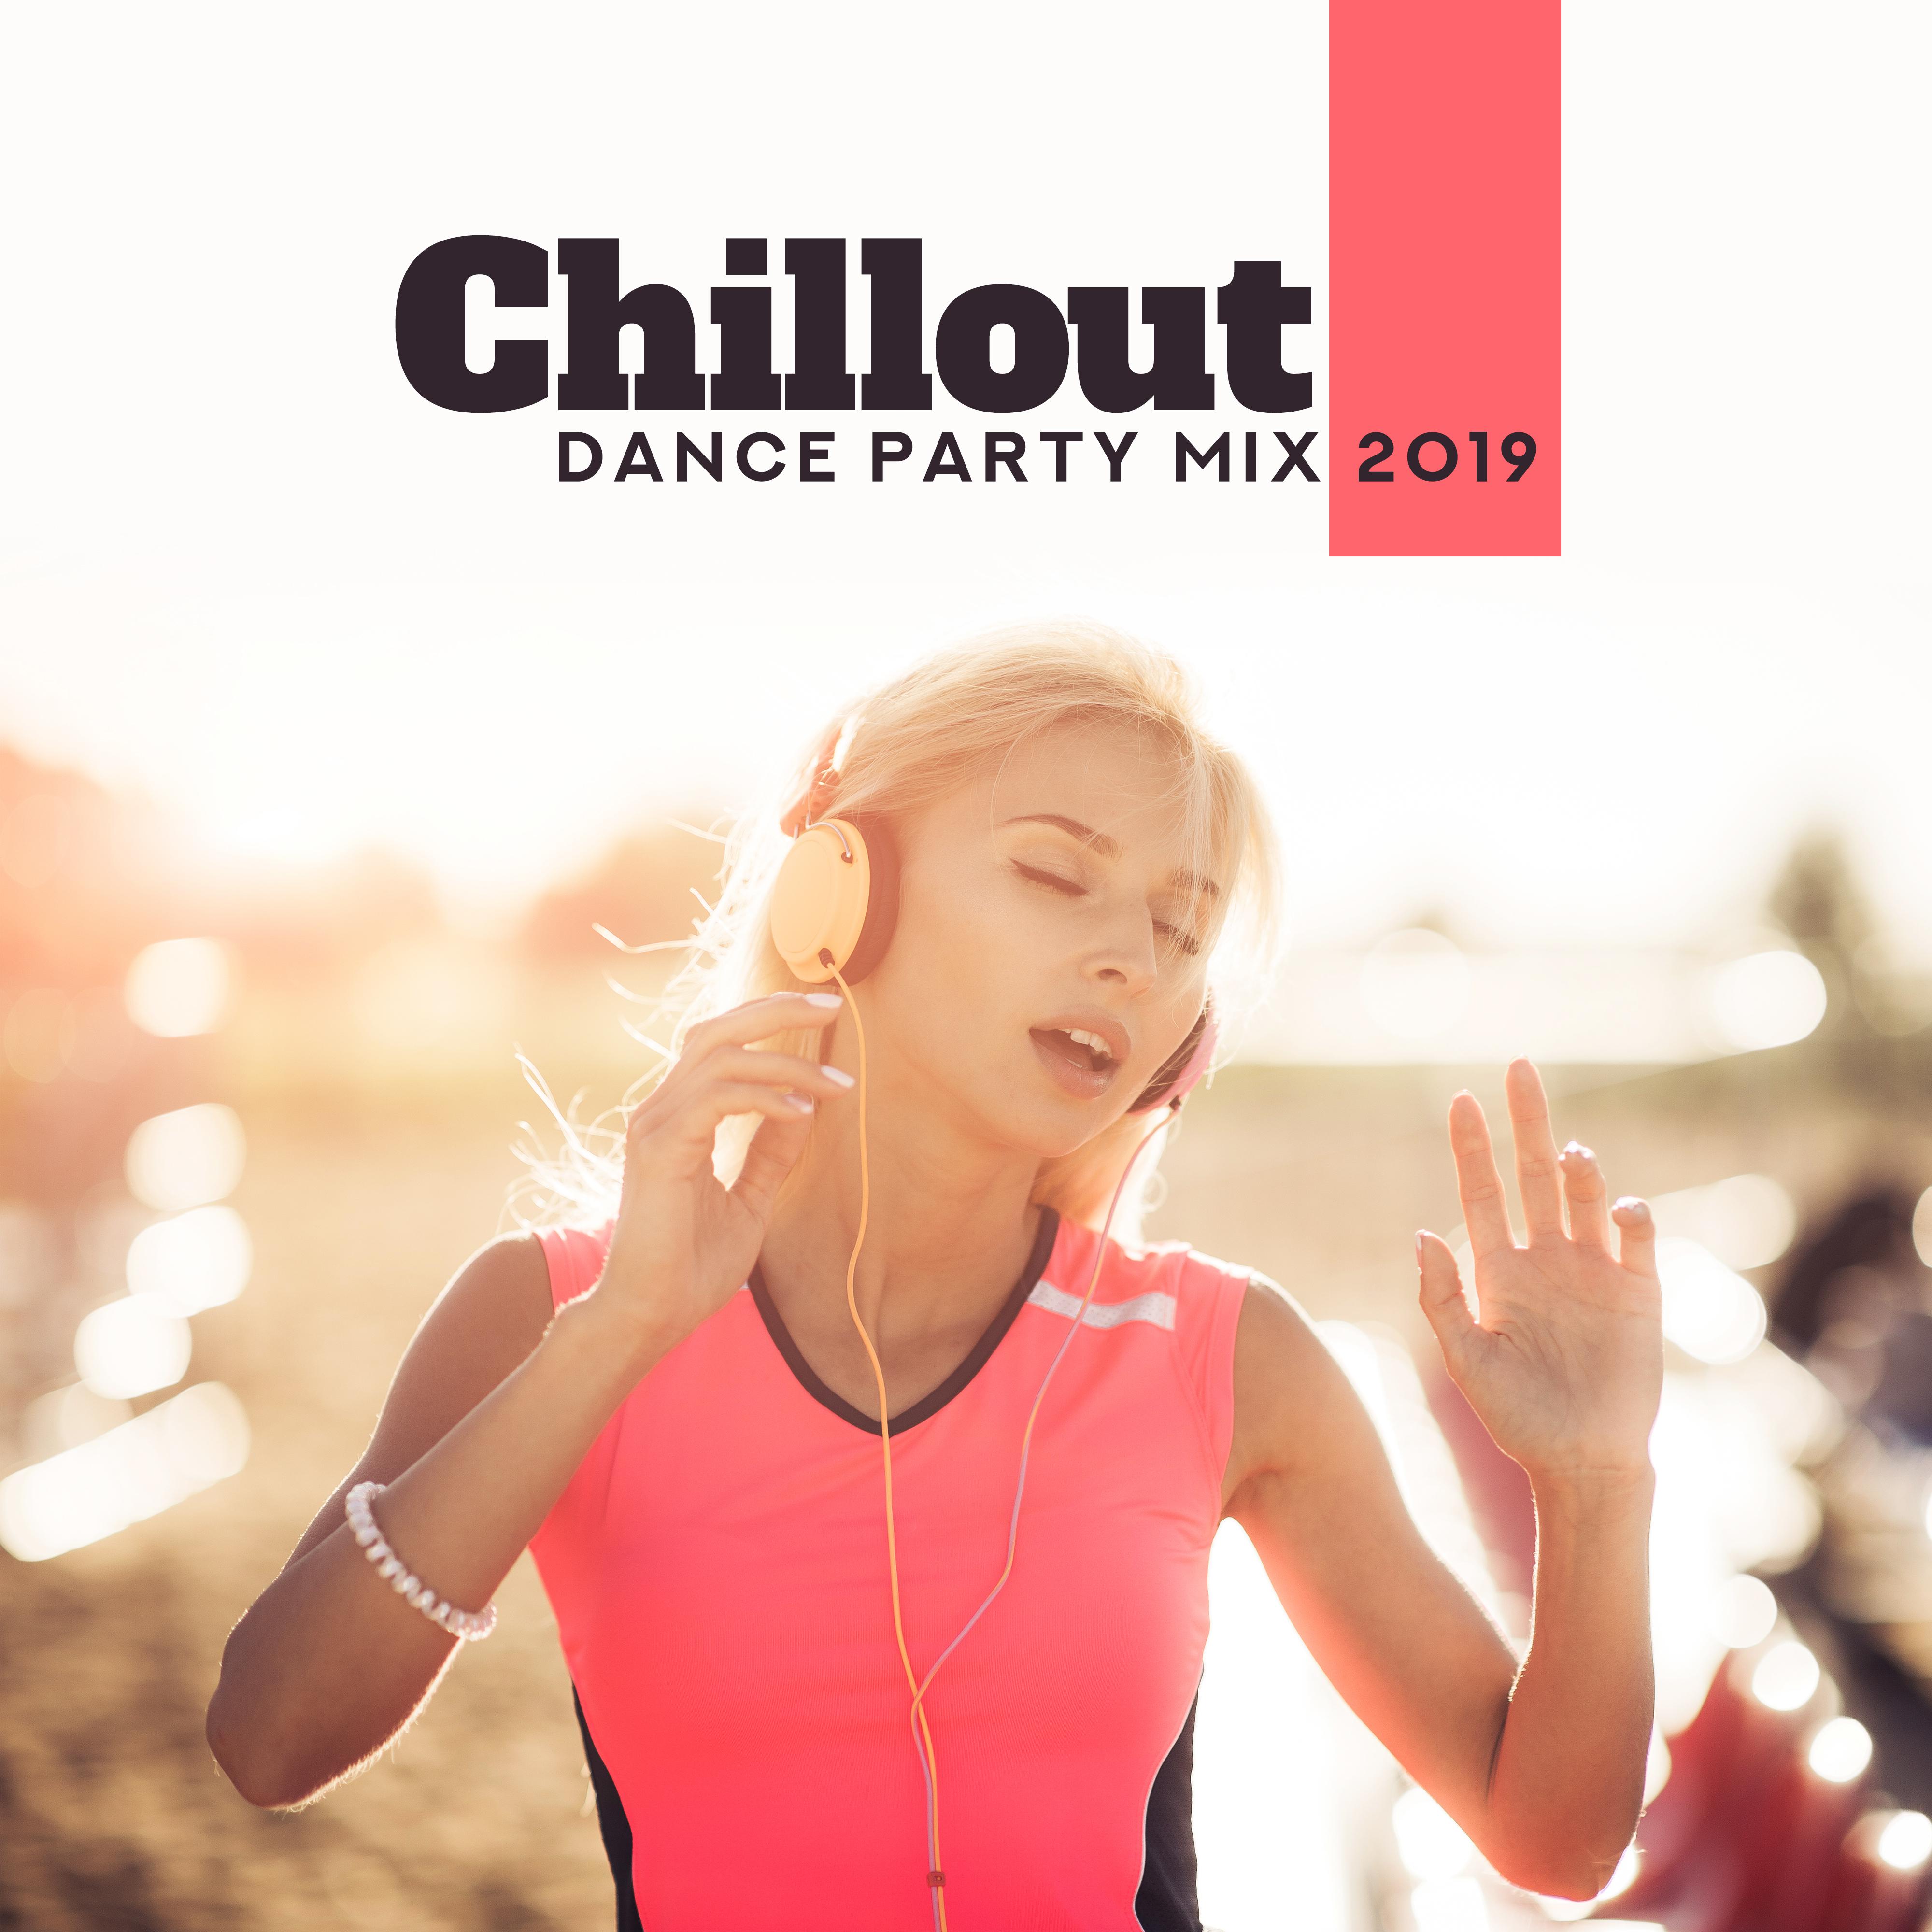 Chillout Dance Party Mix 2019 – 15 Hot Electronic Tunes for Evening Party, Energetic Progressive, Deep & Chill Music, Beach & Poolside Relaxing Songs